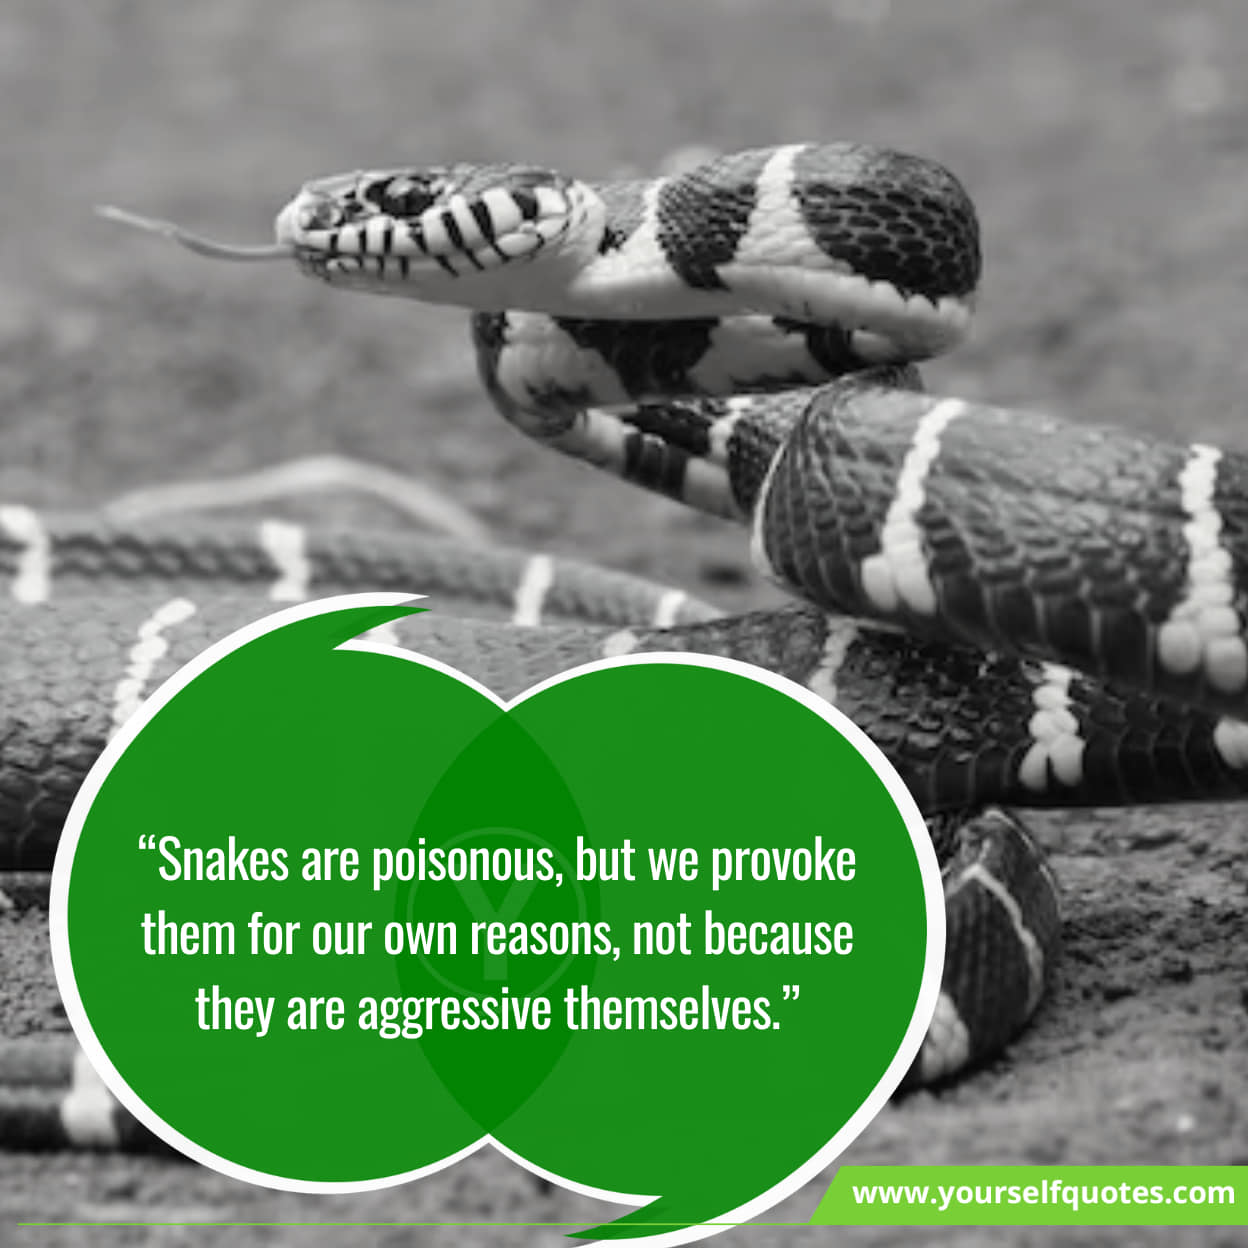 Quotes about the beauty of snakes